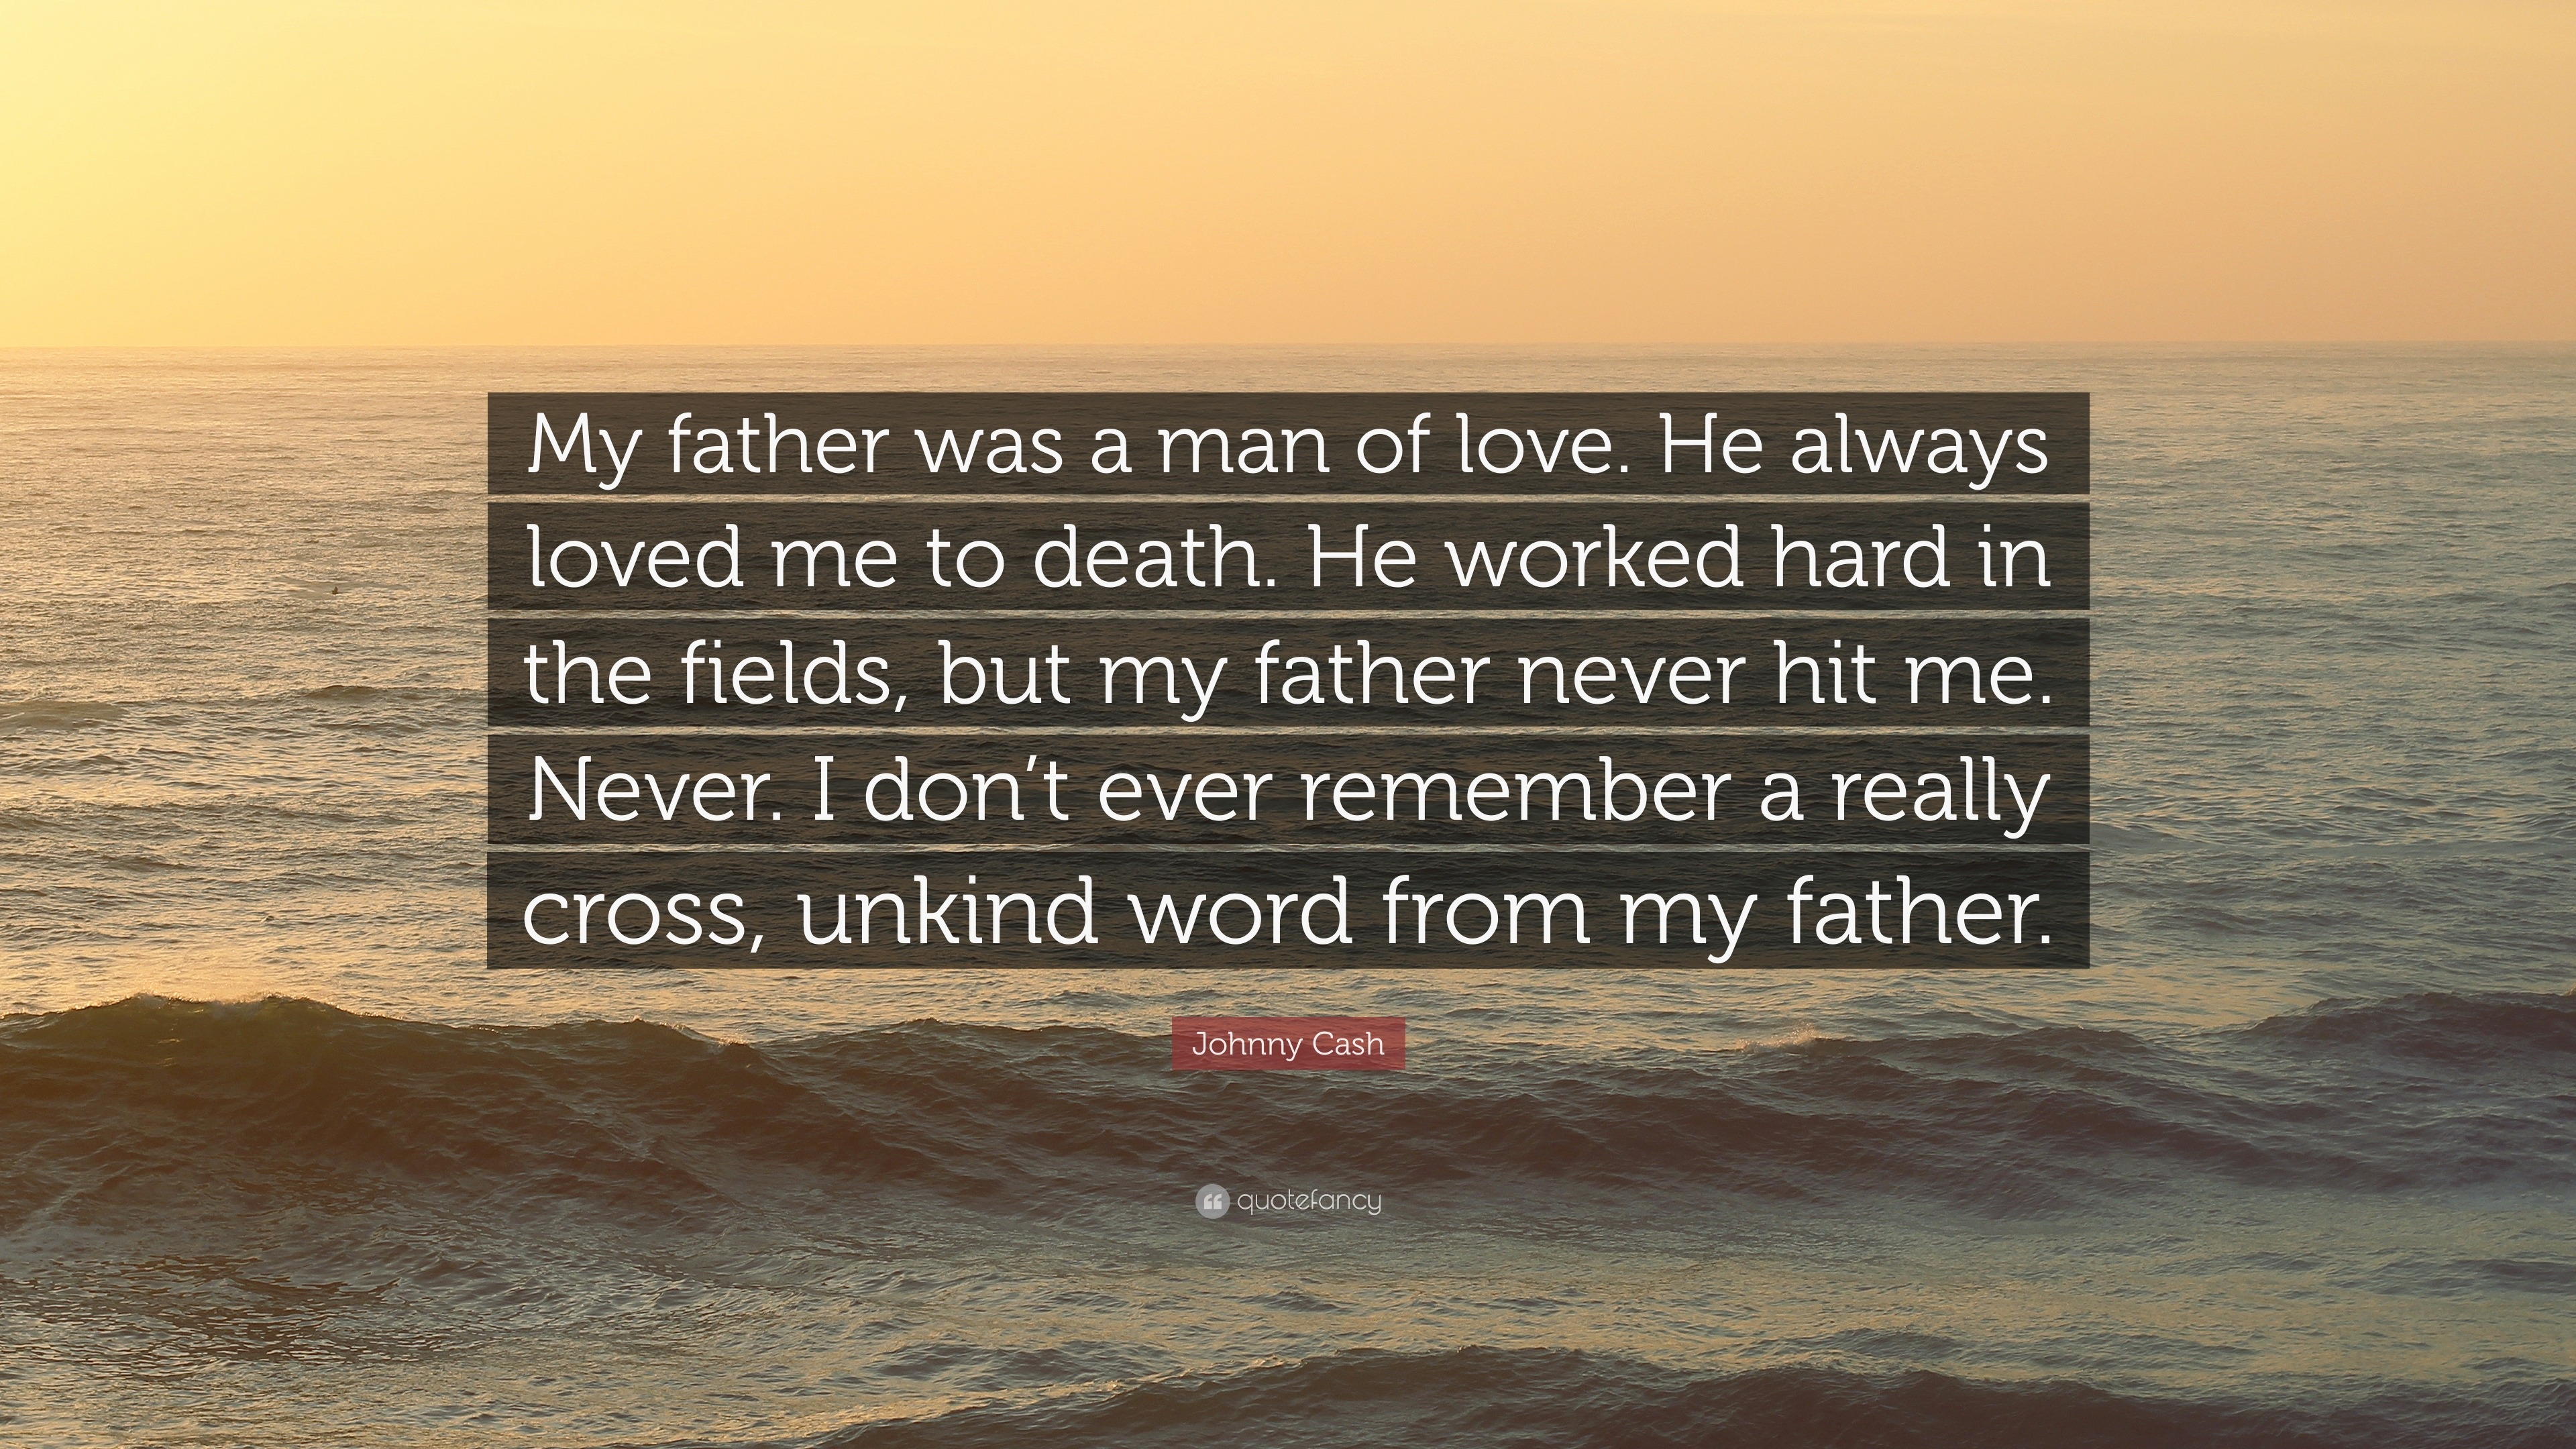 Johnny Cash Quote “My father was a man of love He always loved